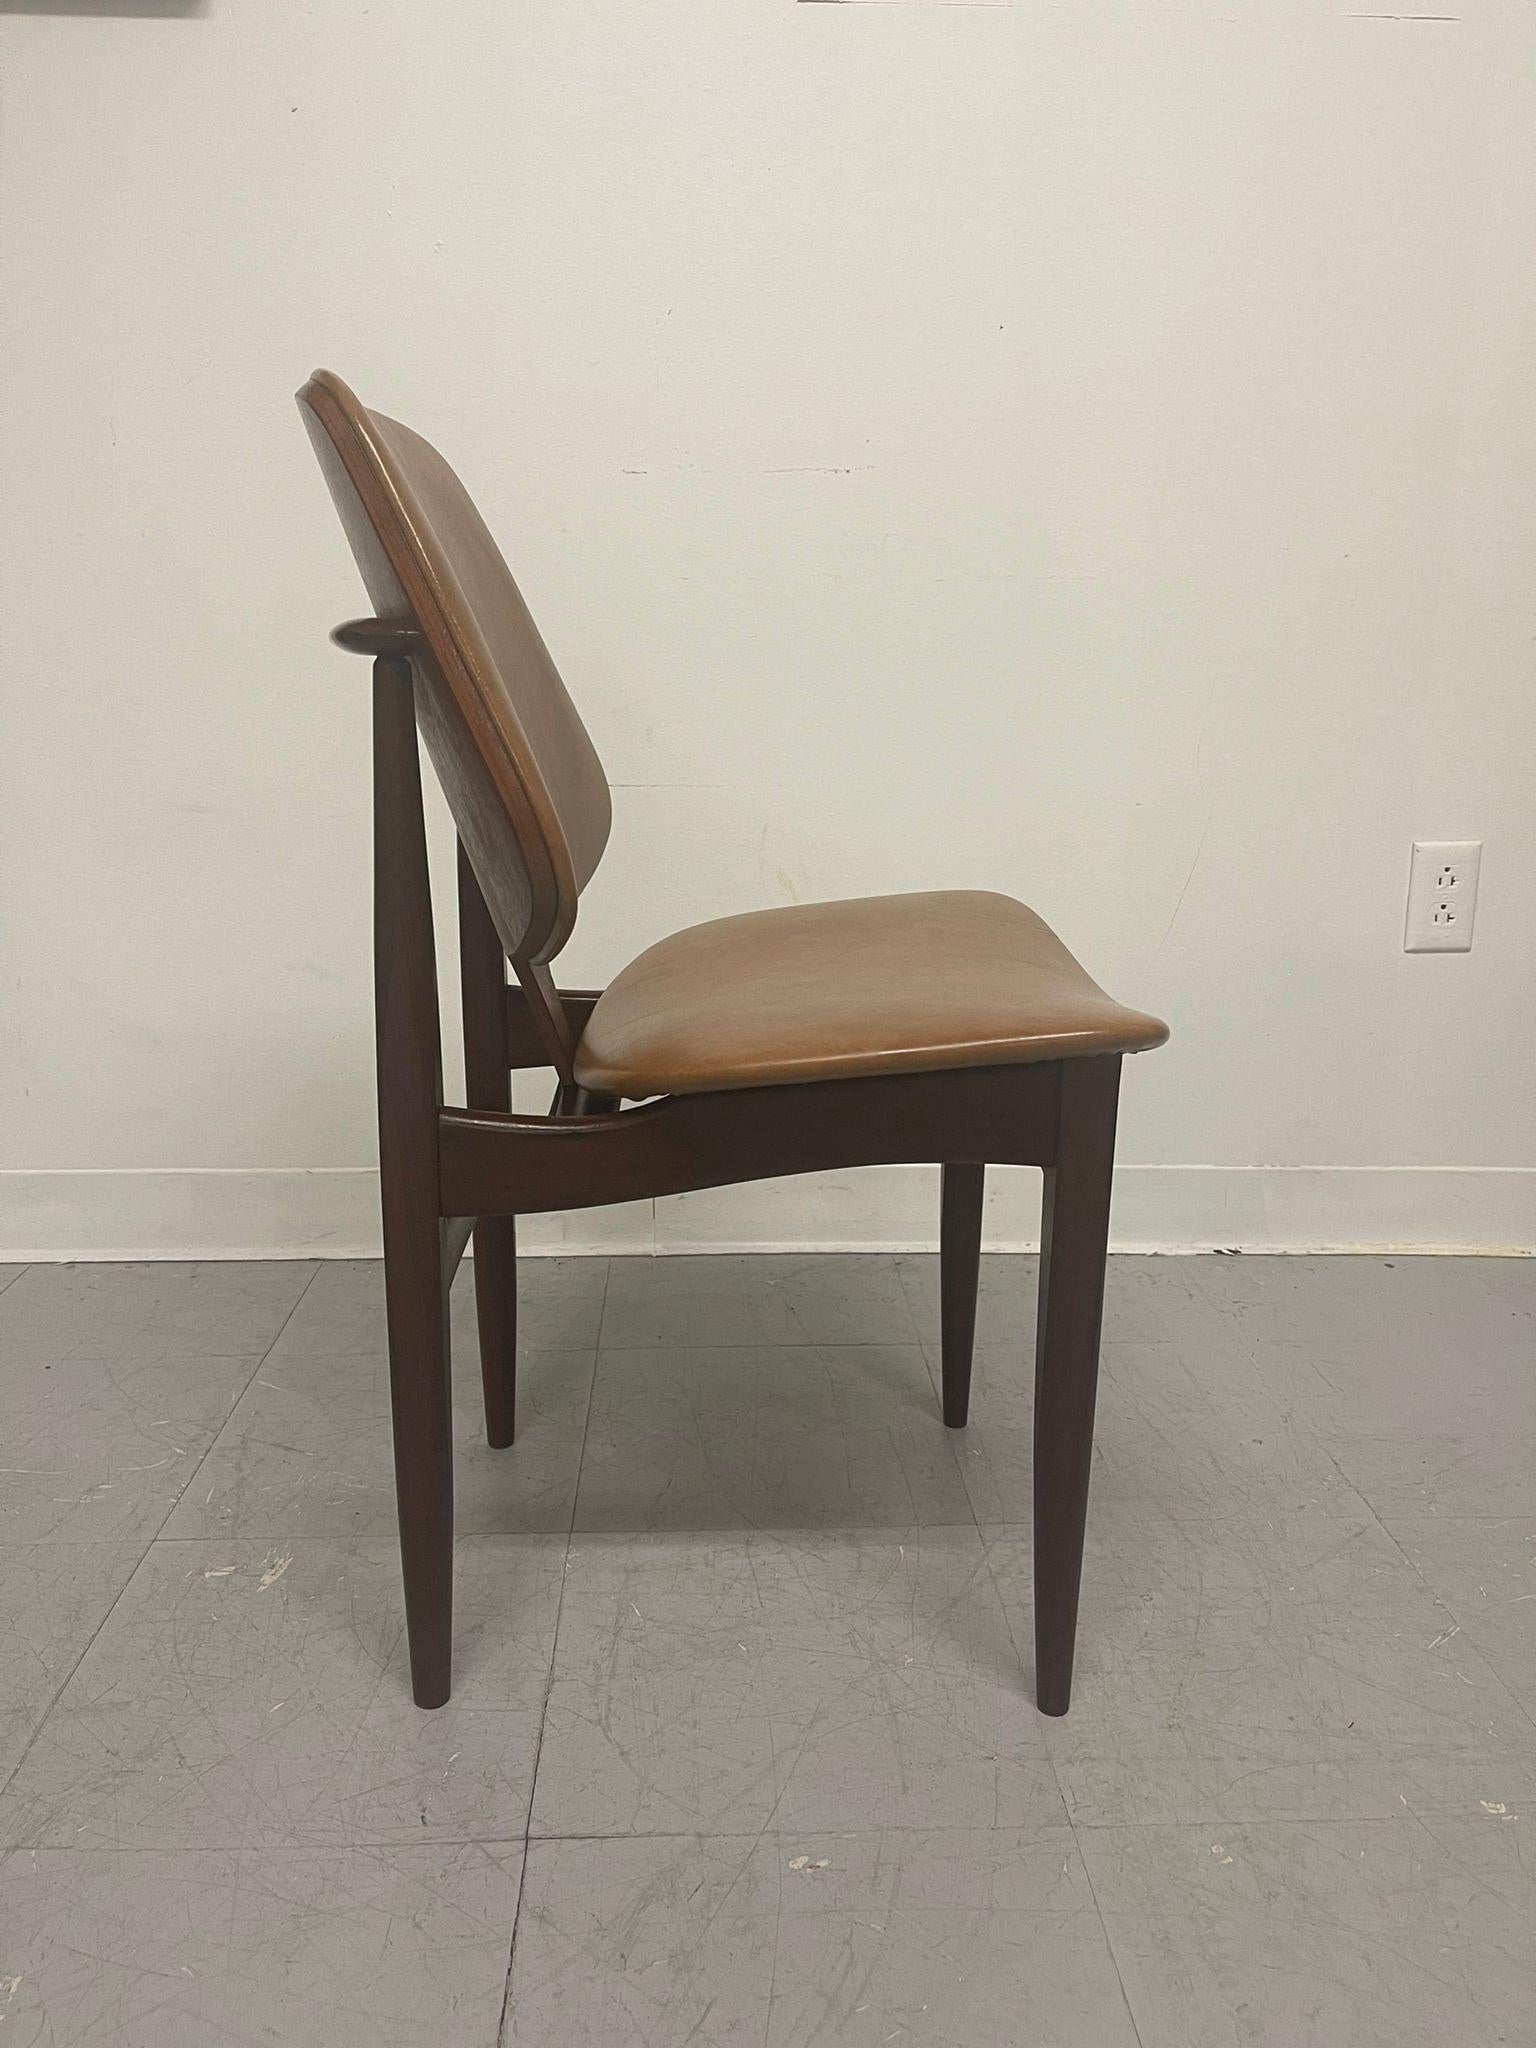 Wood Vintage Mid Century Modern Walnut Toned Chair. For Sale